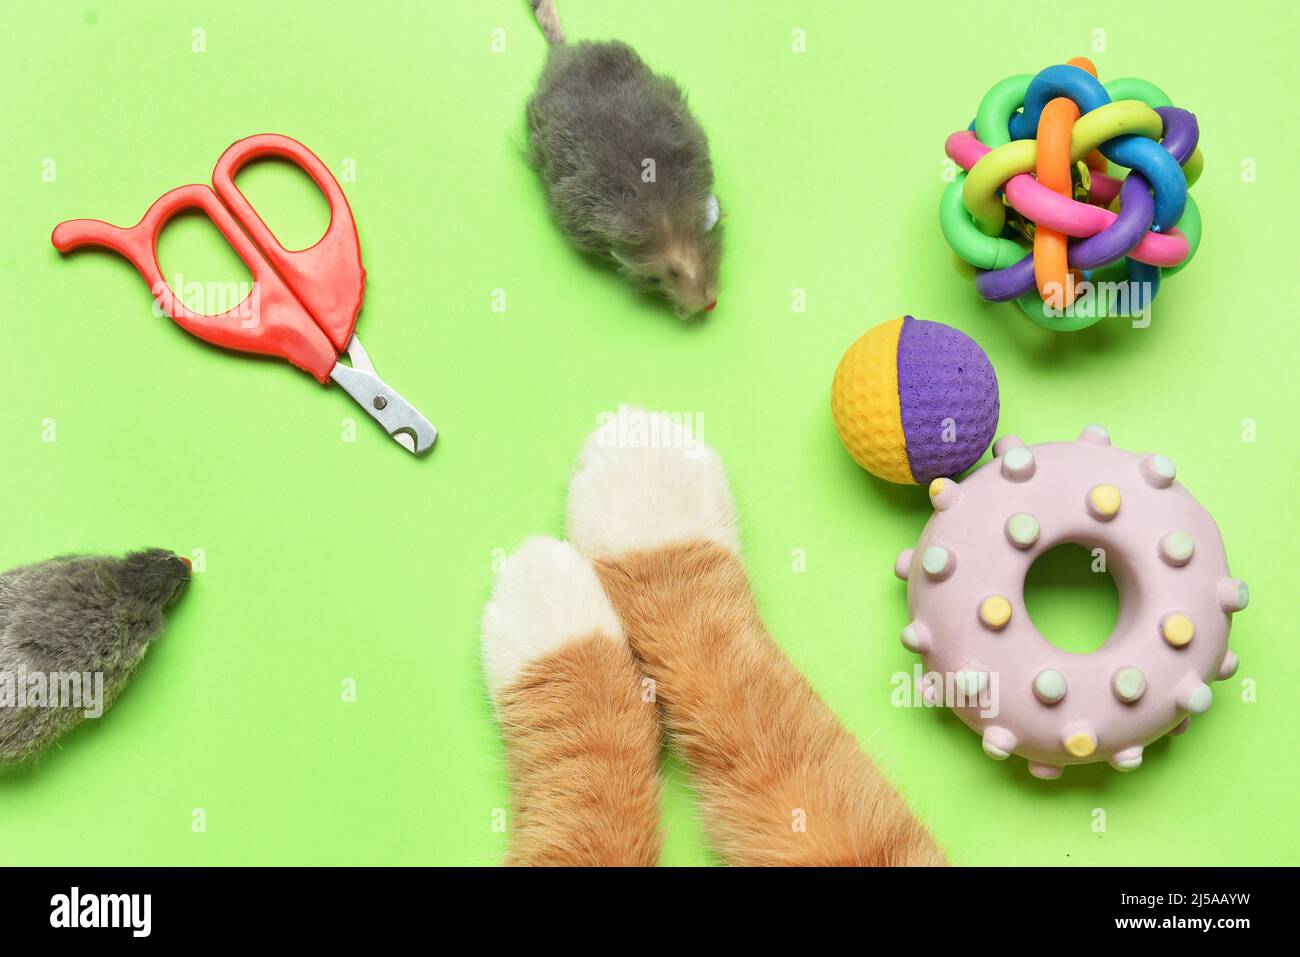 Paws of cute cat and toys on green background Stock Photo